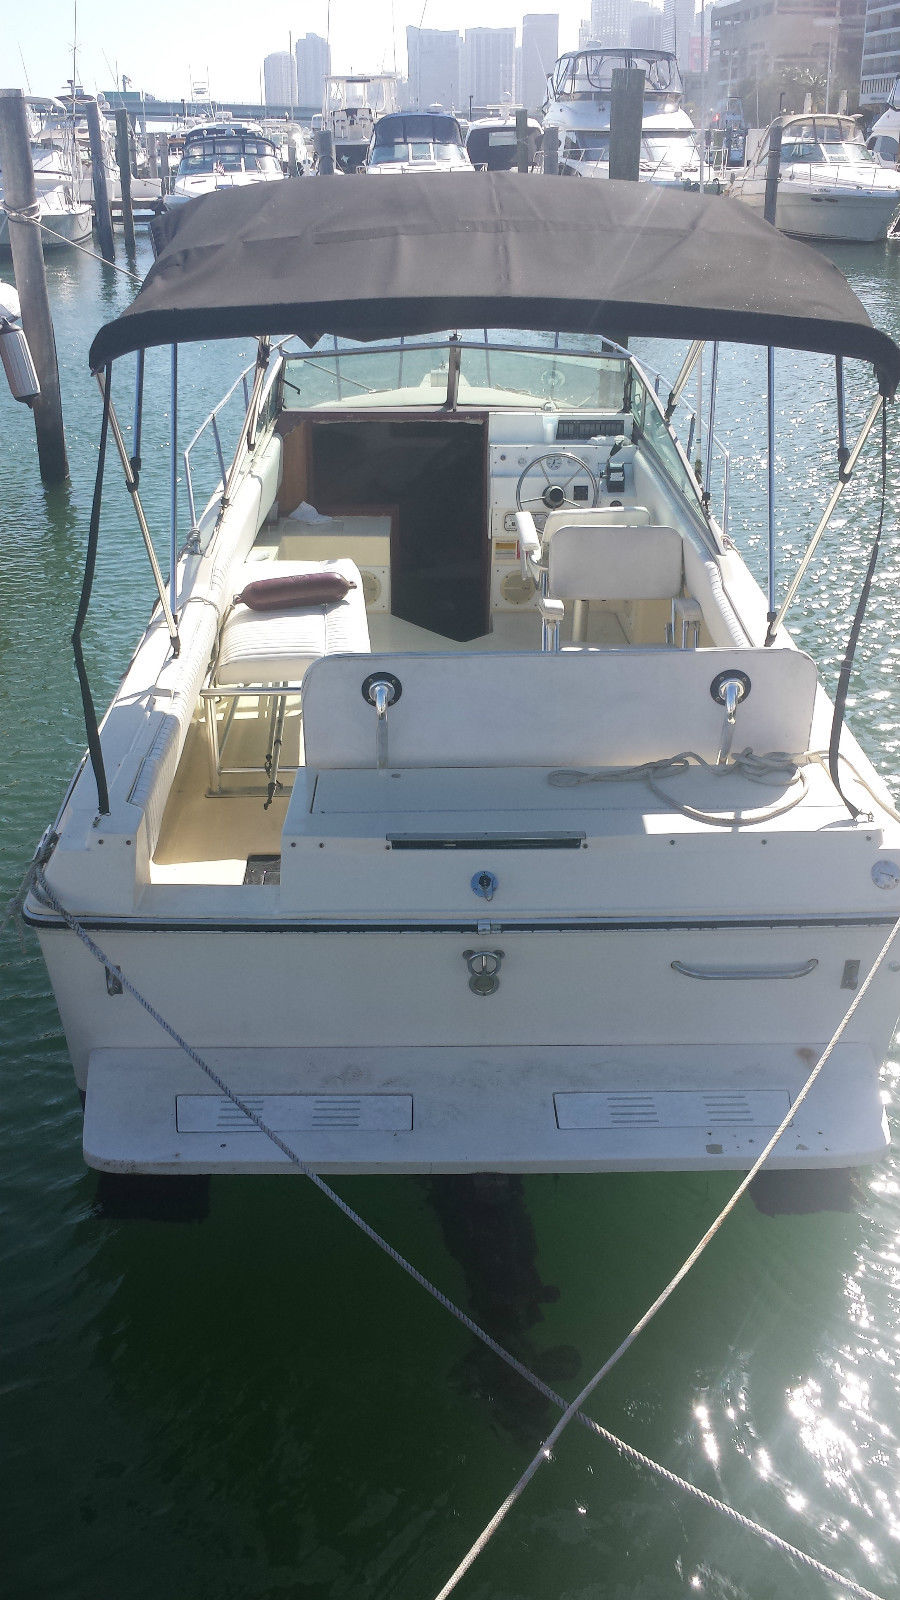 Sea Ray Cuddy Cabin 1988 for sale for $6,000 - Boats-from ...